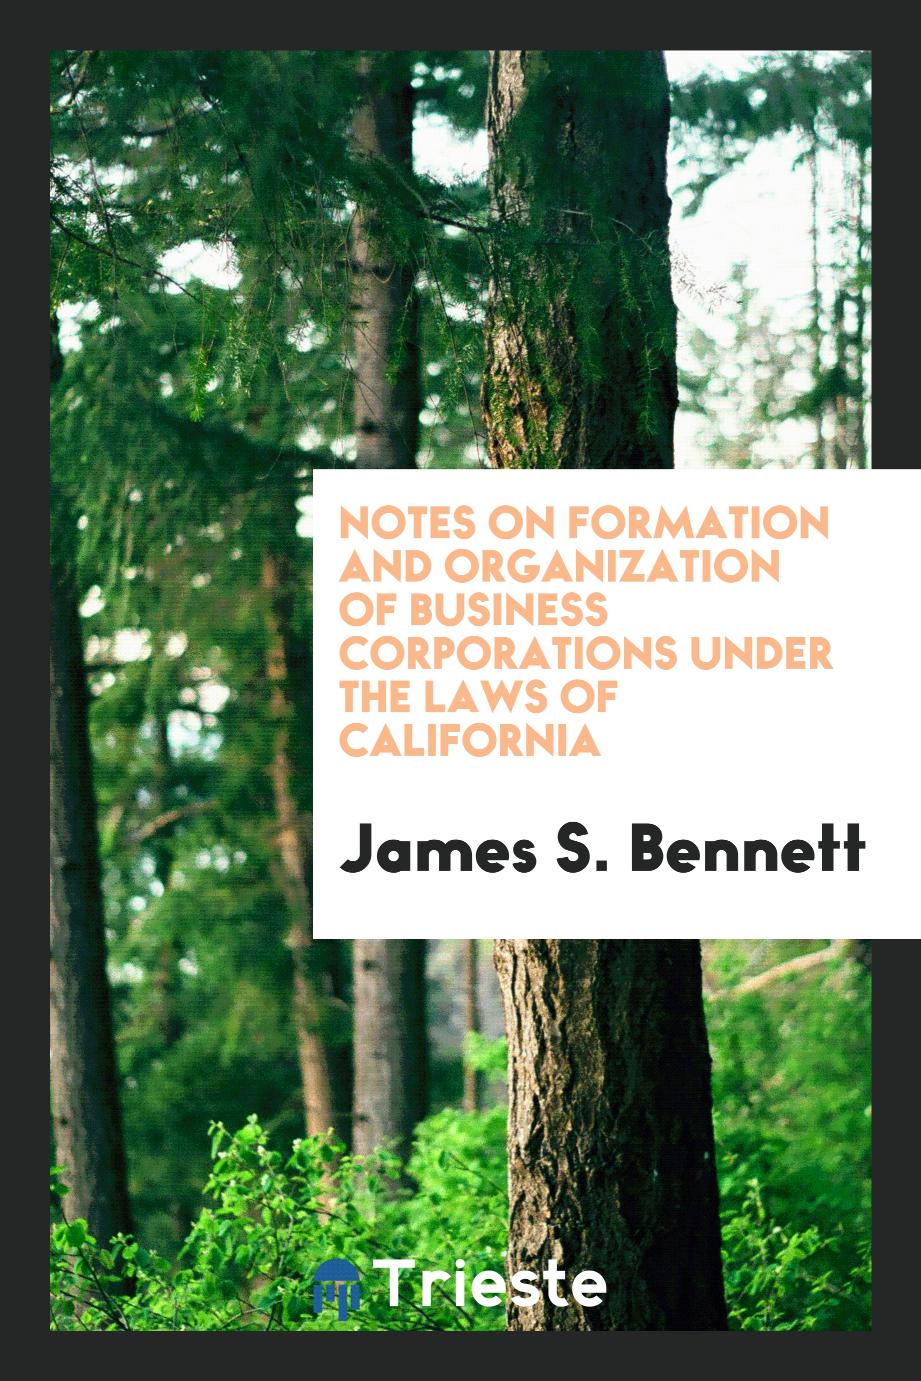 Notes on Formation and Organization of Business Corporations Under the Laws of California